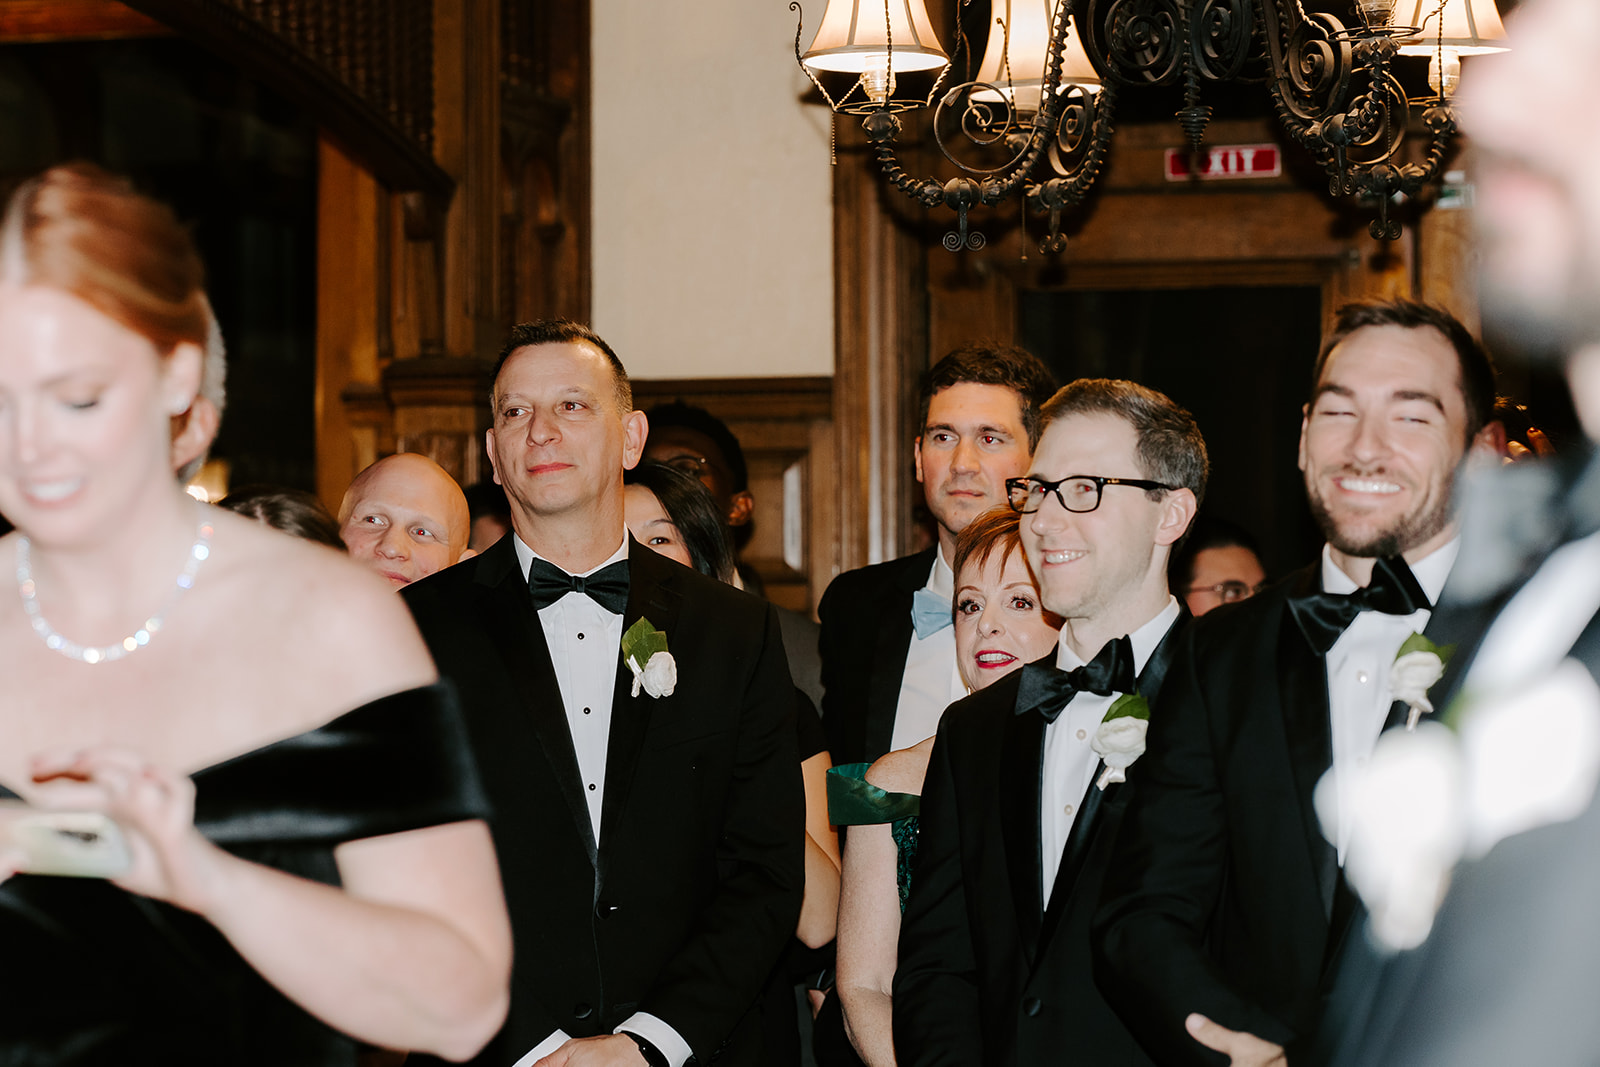 Guests celebrate the bride and groom as they exit their big day